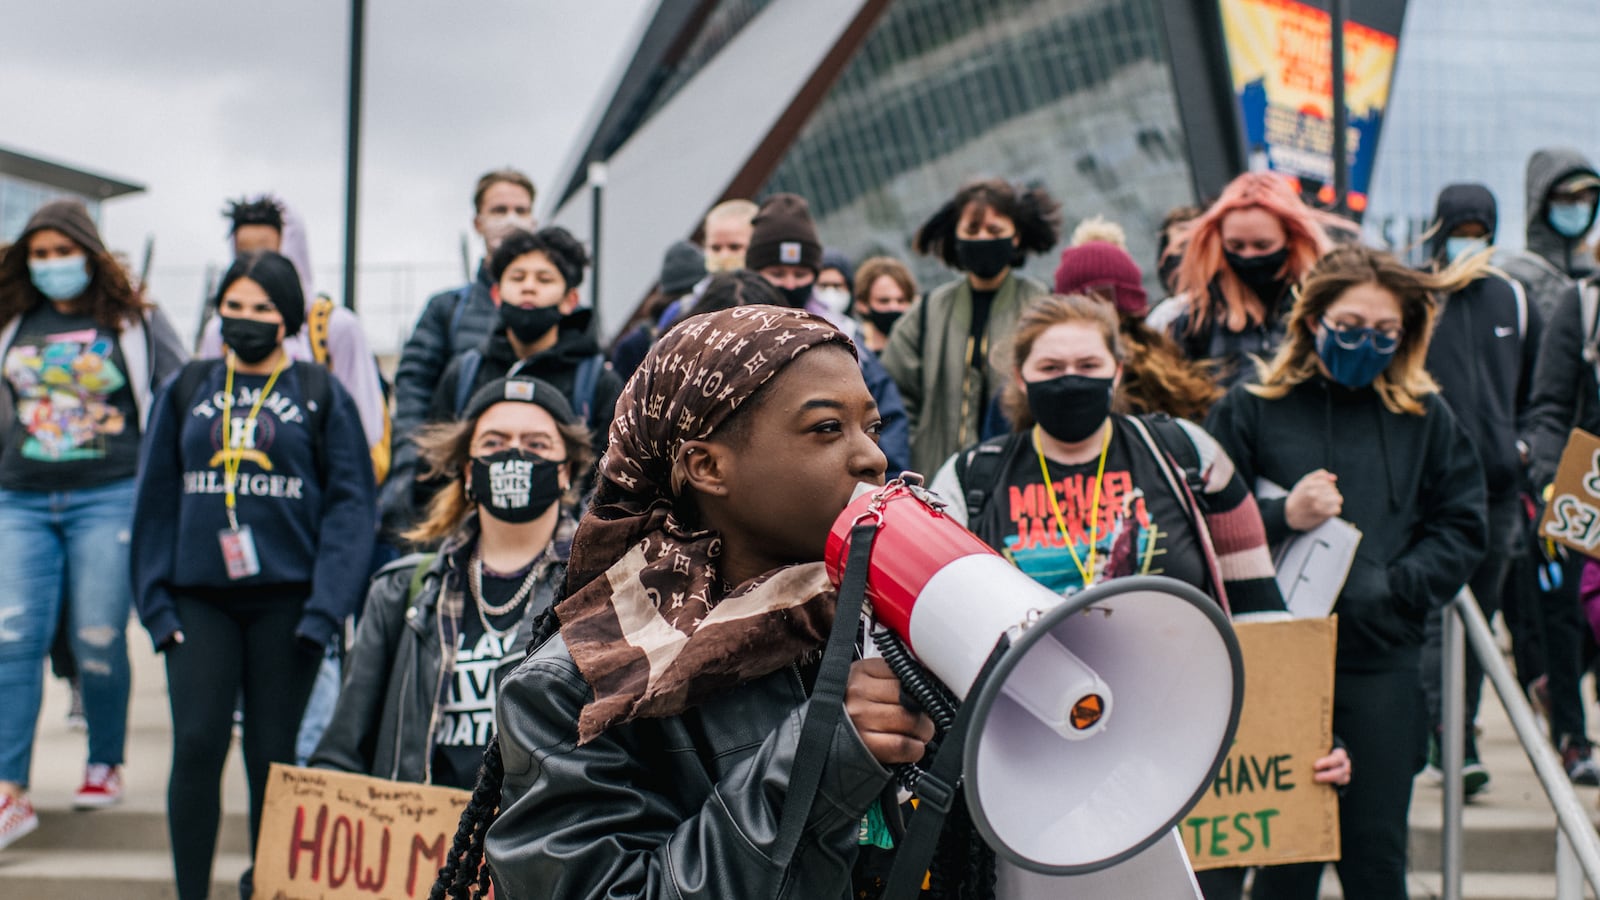 A young woman wearing a black jacket and brown headdress speaks through a red and white bullhorn microphone. There are several students holding signs or standing in solidarity behind her.